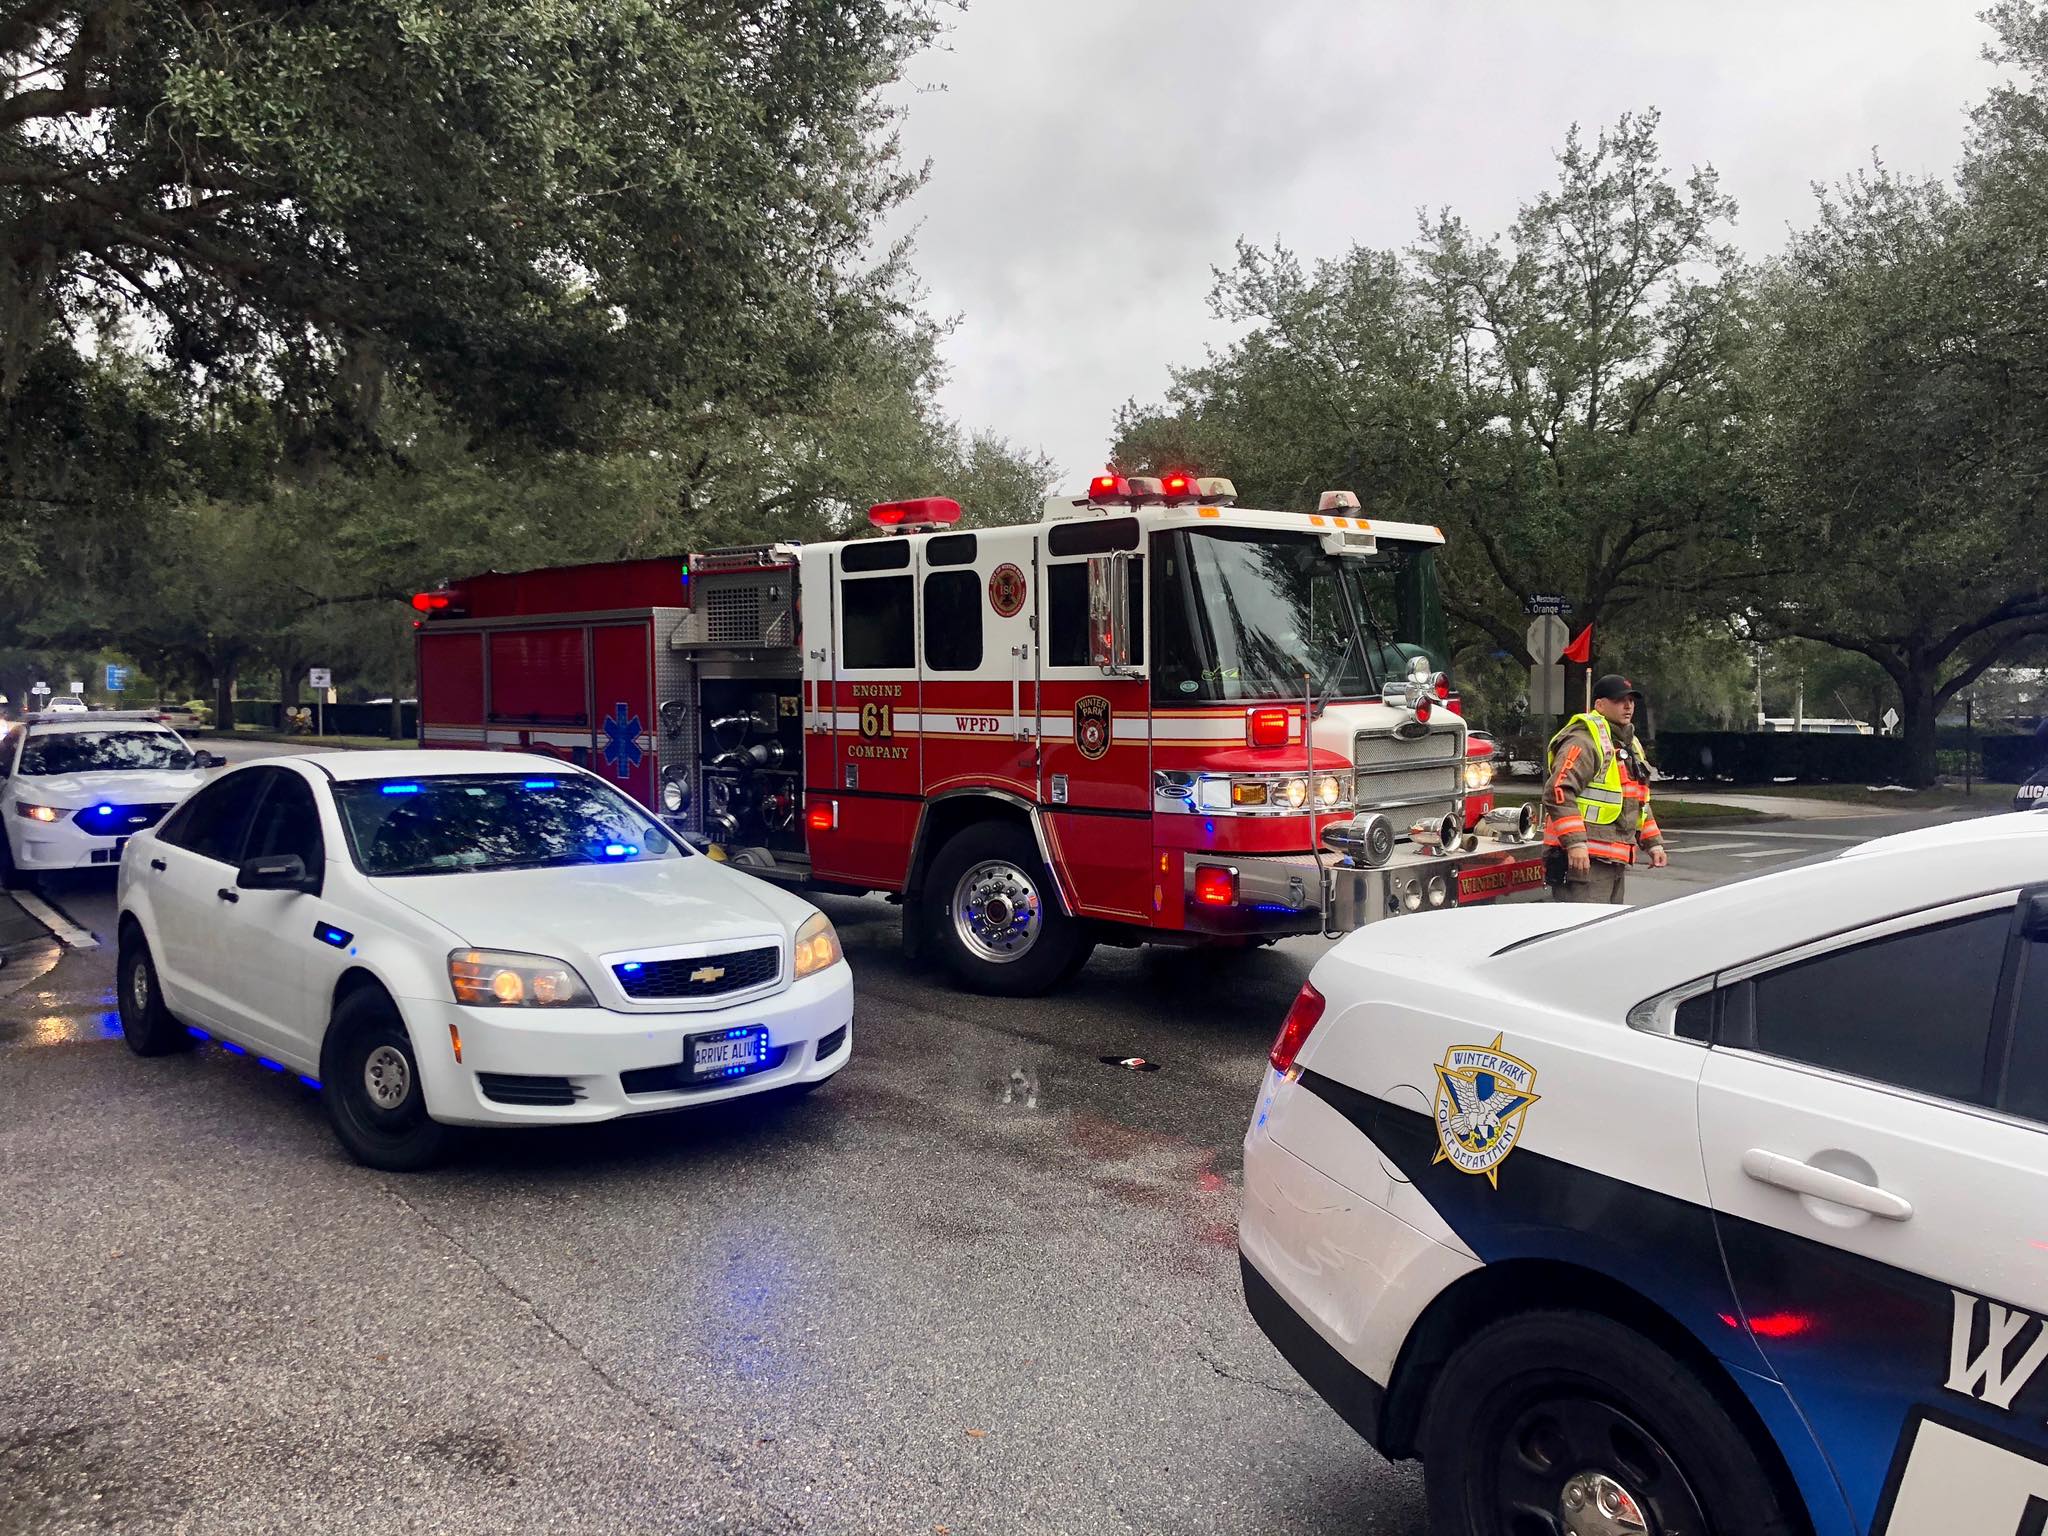 Firetruck and police cars respond to a car accident.